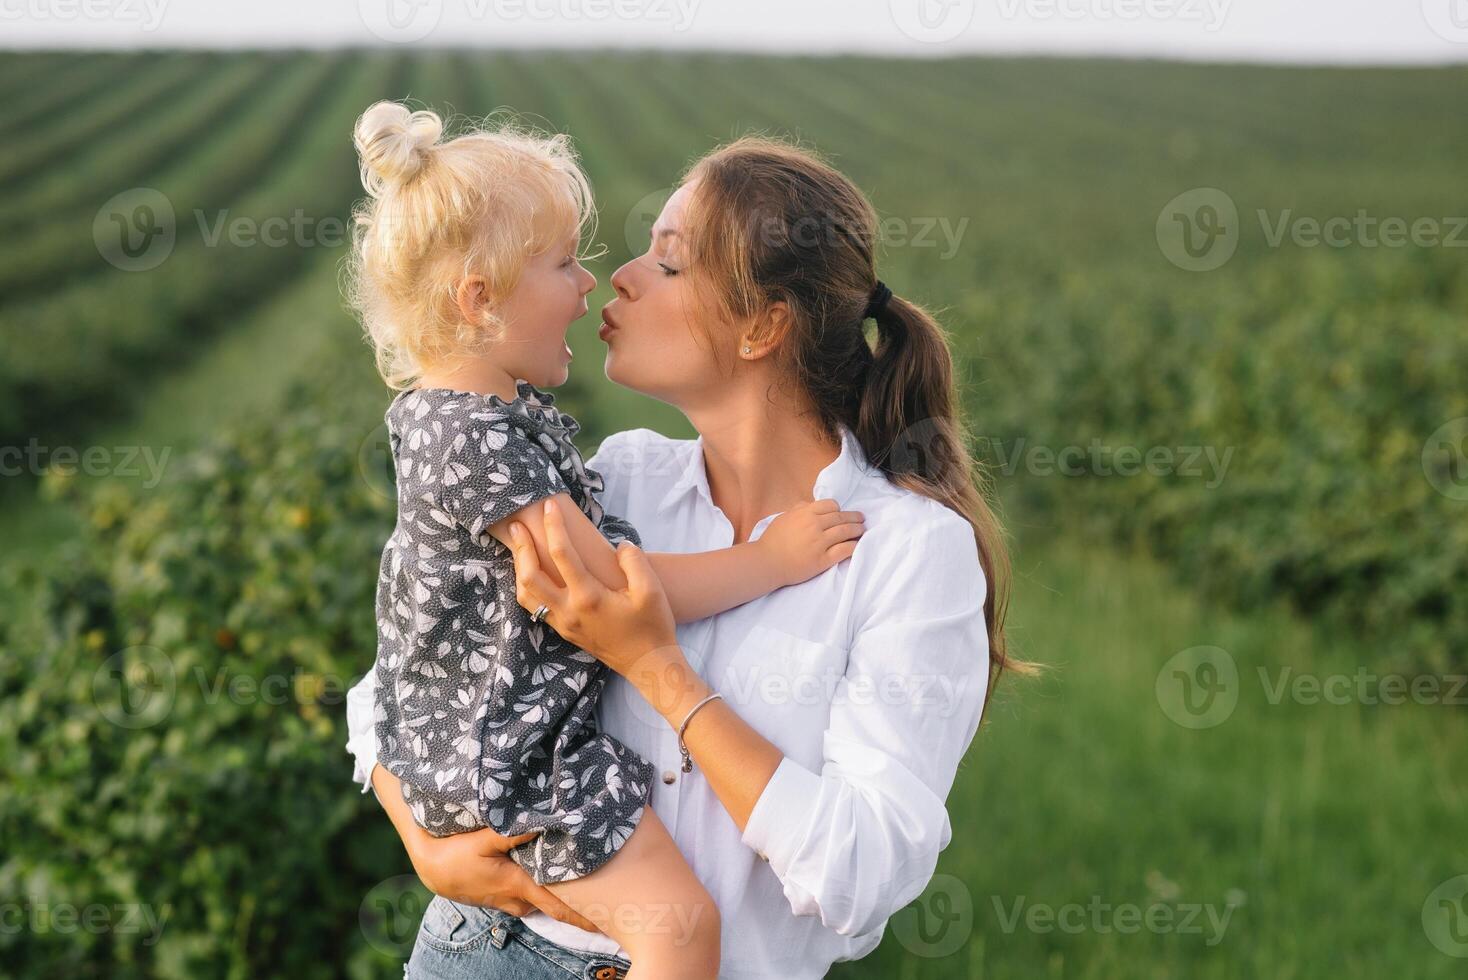 Stilish mother and daughter having fun on the nature. Happy family concept. Beauty nature scene with family outdoor lifestyle. Happy family resting together. Happiness in family life. Mothers day photo